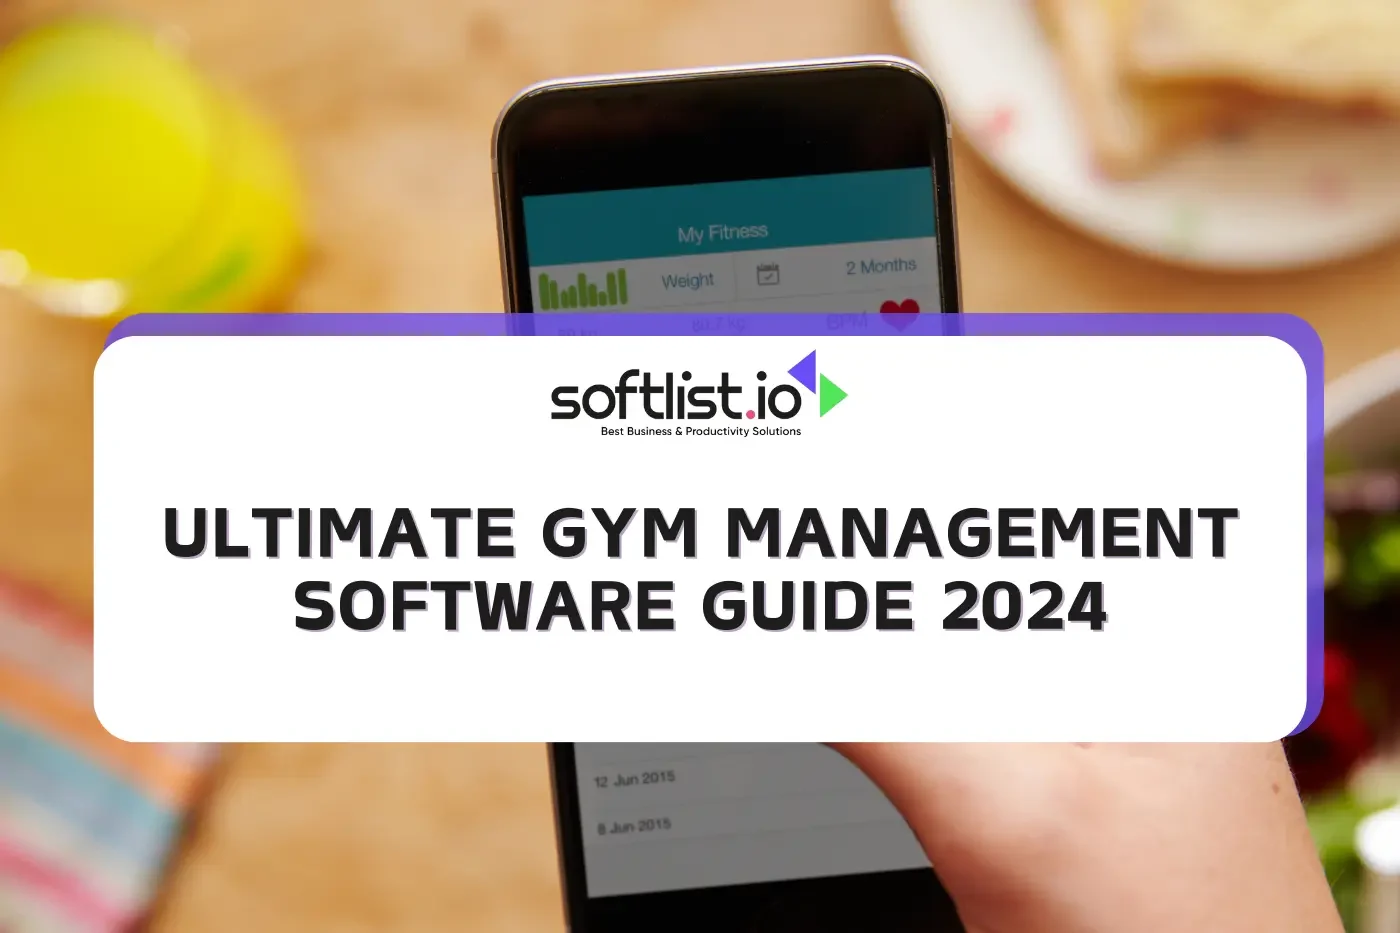 Ultimate Gym Management Software Guide 2024